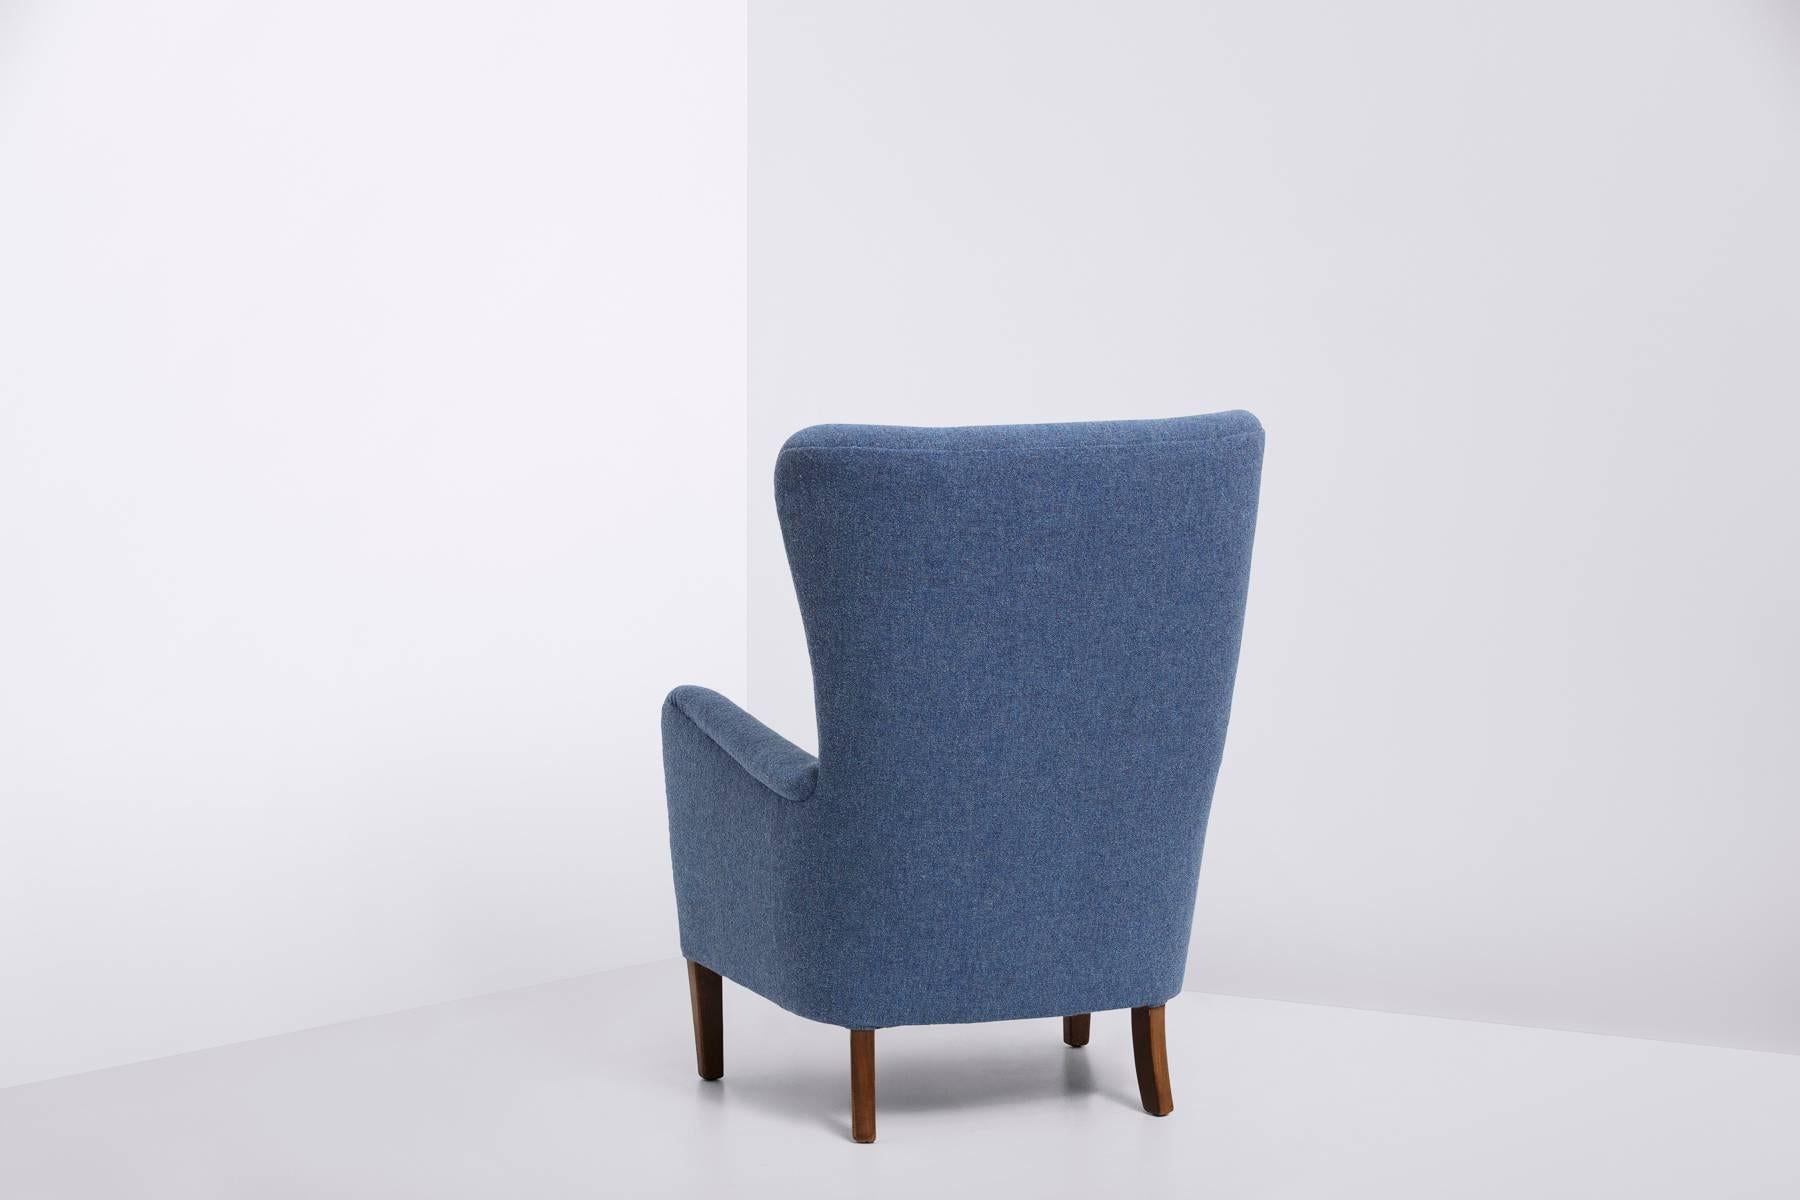 Mid-Century Modern Danish Produced Wingback Chair, 1940s, Blue Wool Upholstery by Kvadrat For Sale